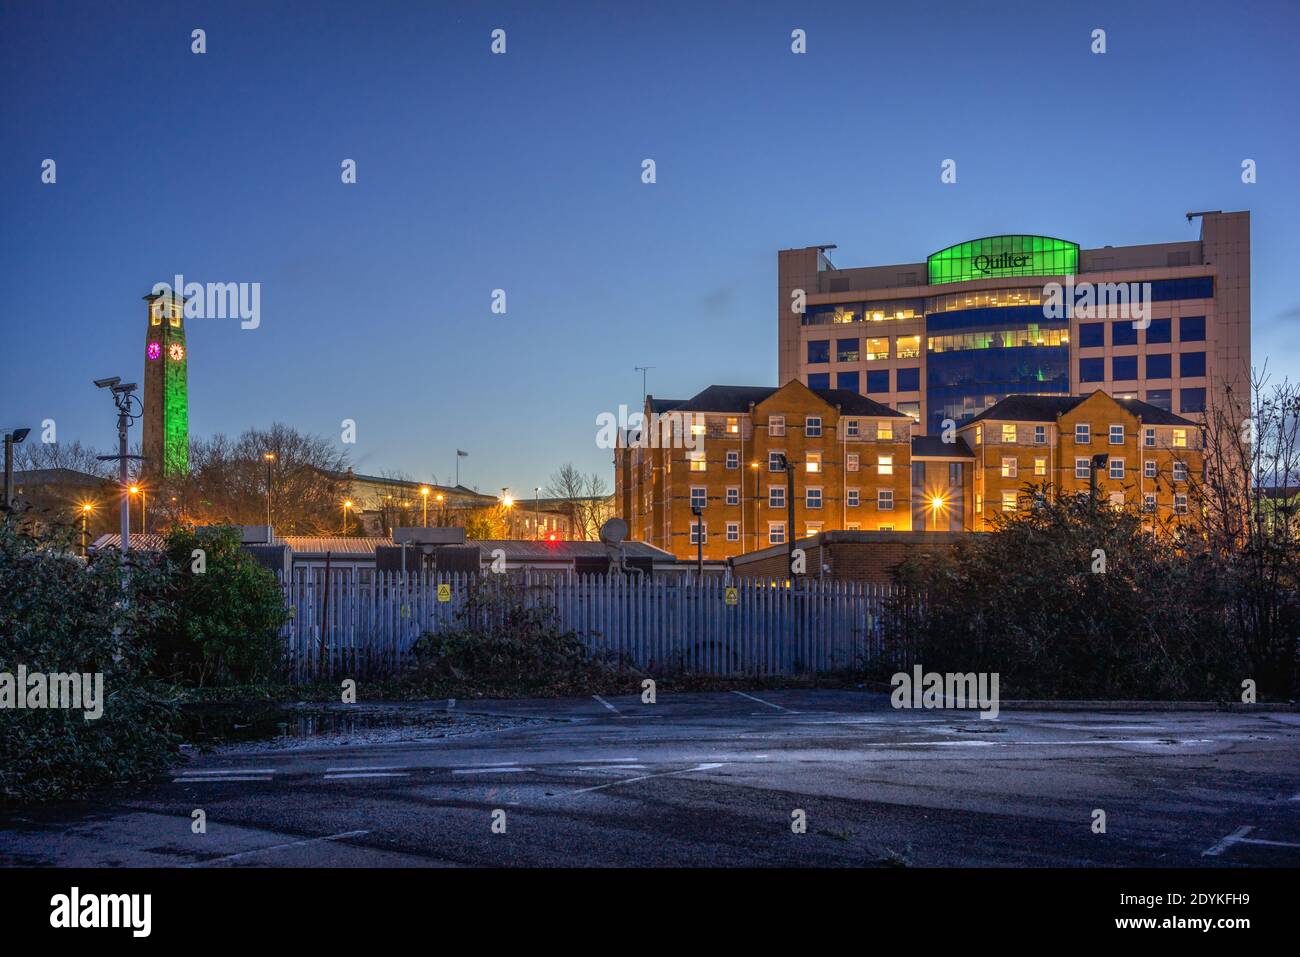 Civic Centre clock tower and the Quilter office building during blue hour in December 2020 in the city centre of Southampton, Hampshire, England, UK Stock Photo